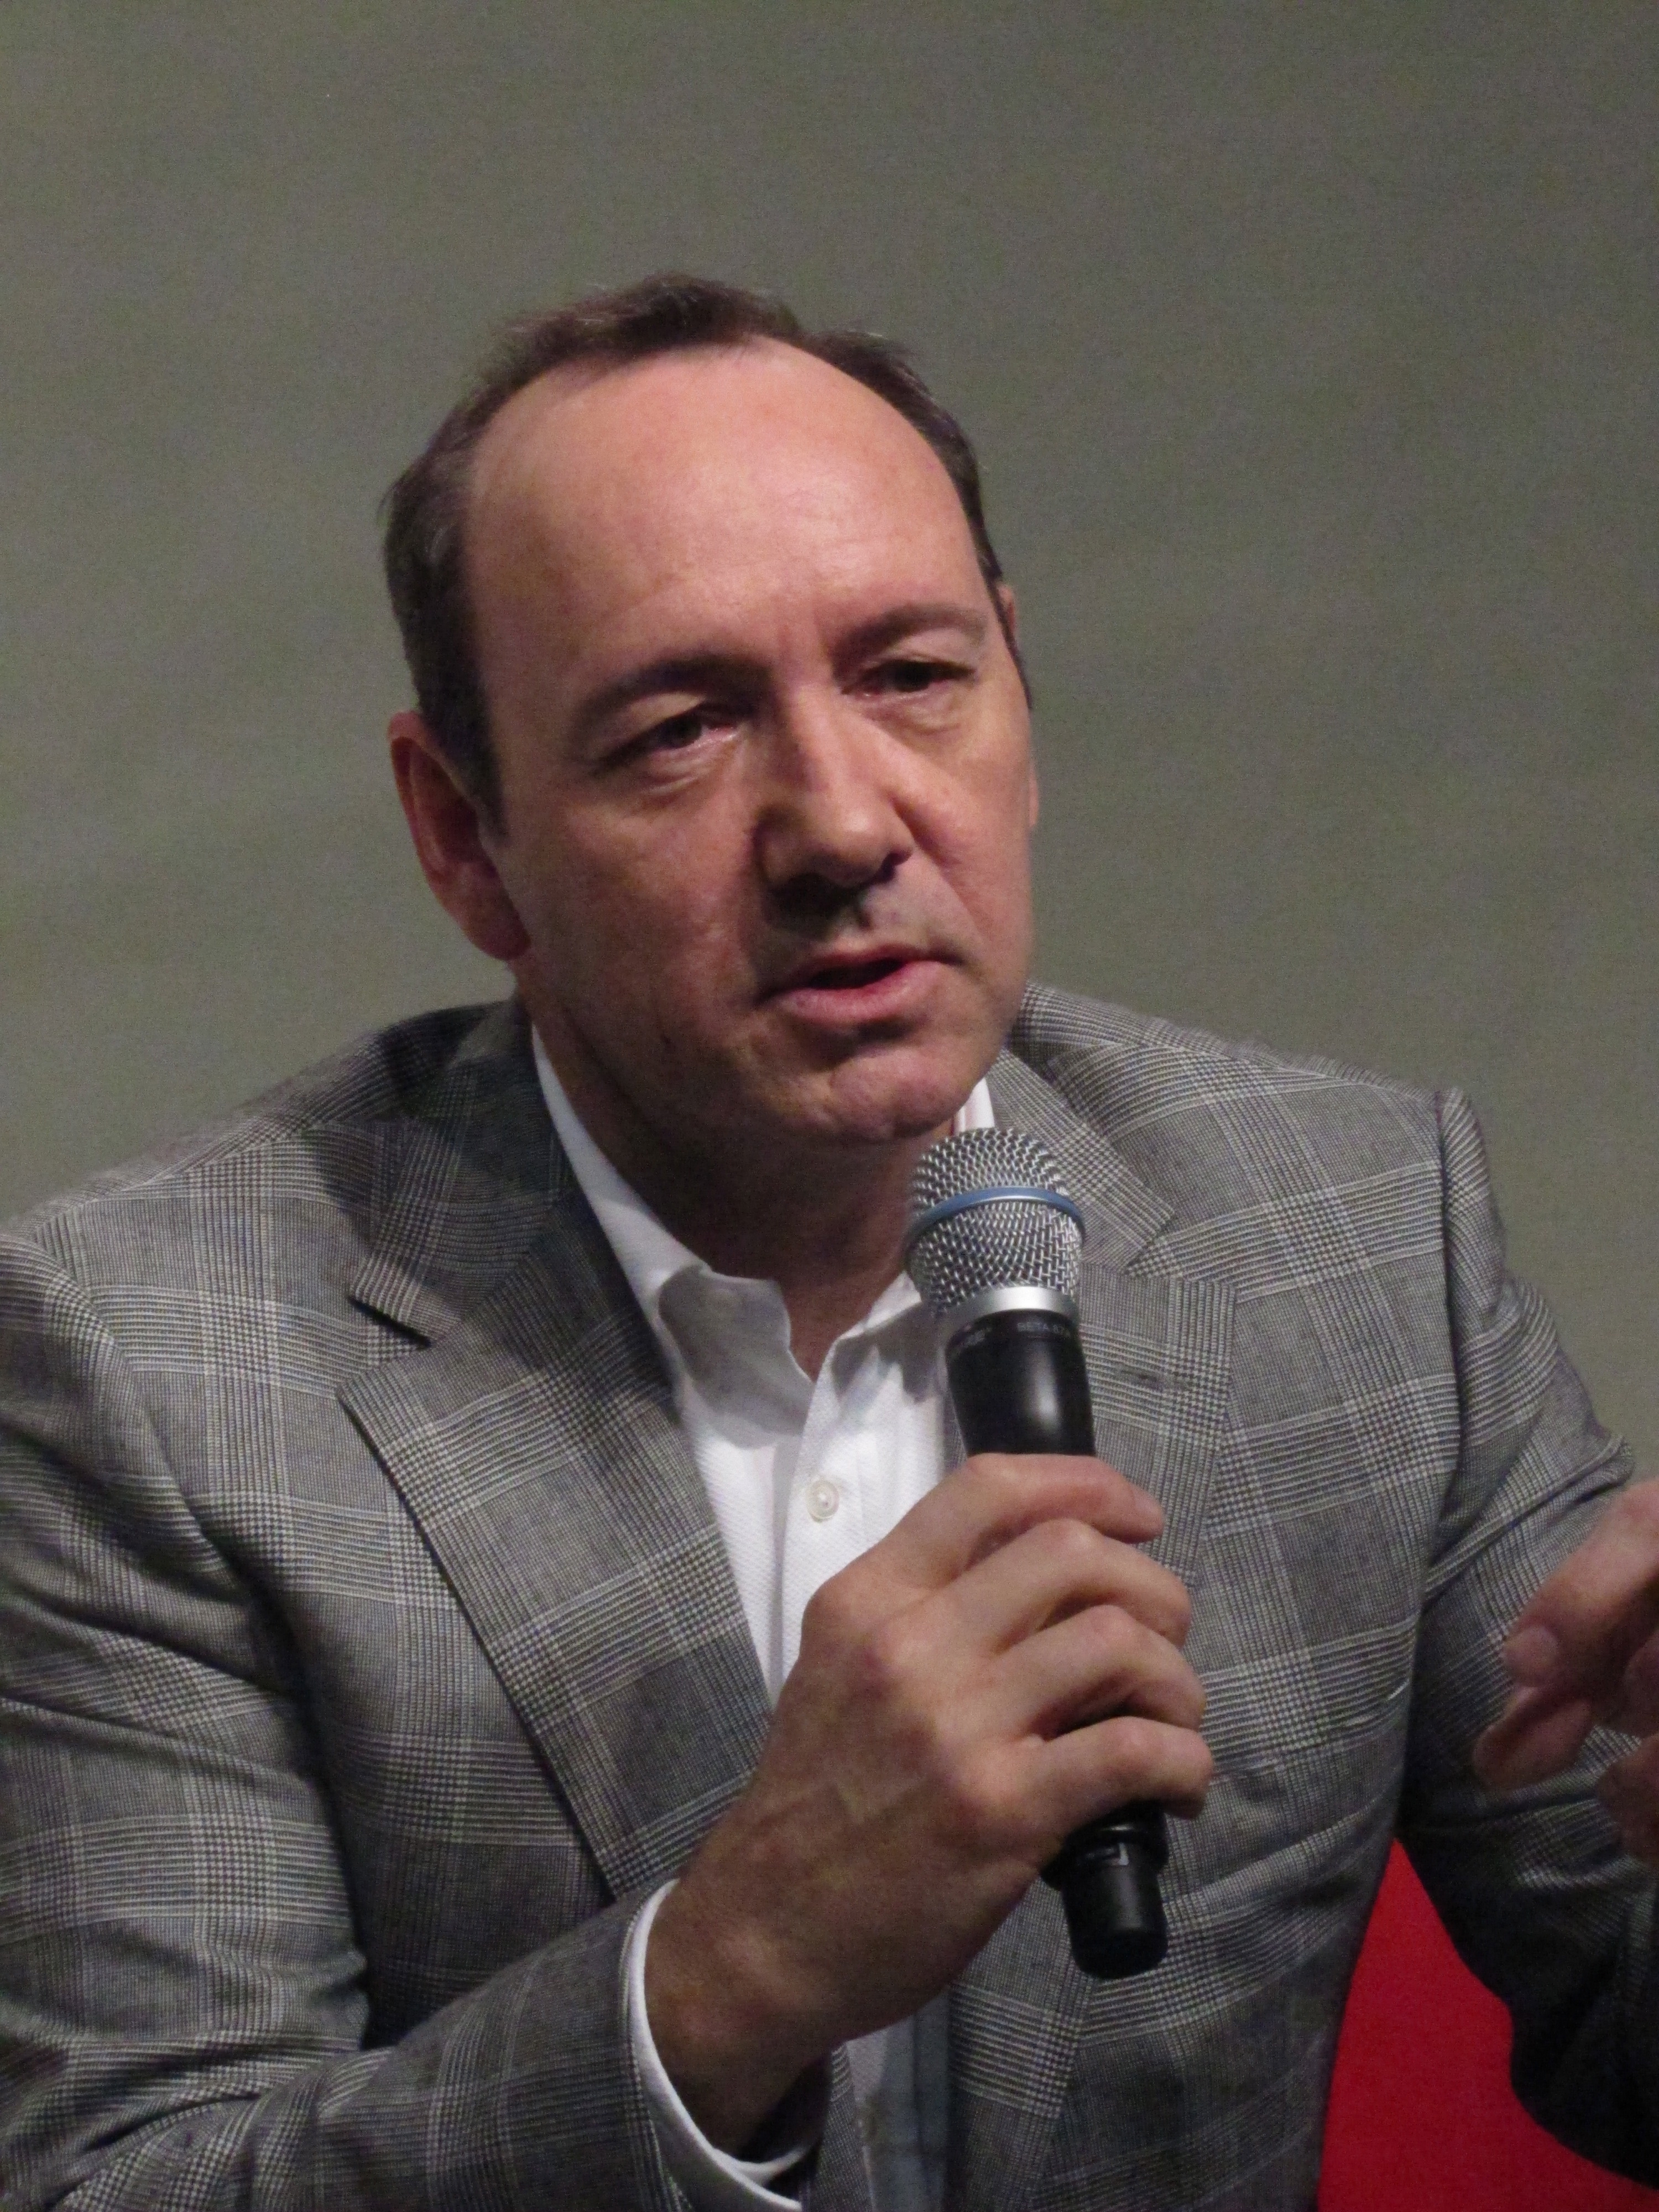 photos-of-kevin-spacey